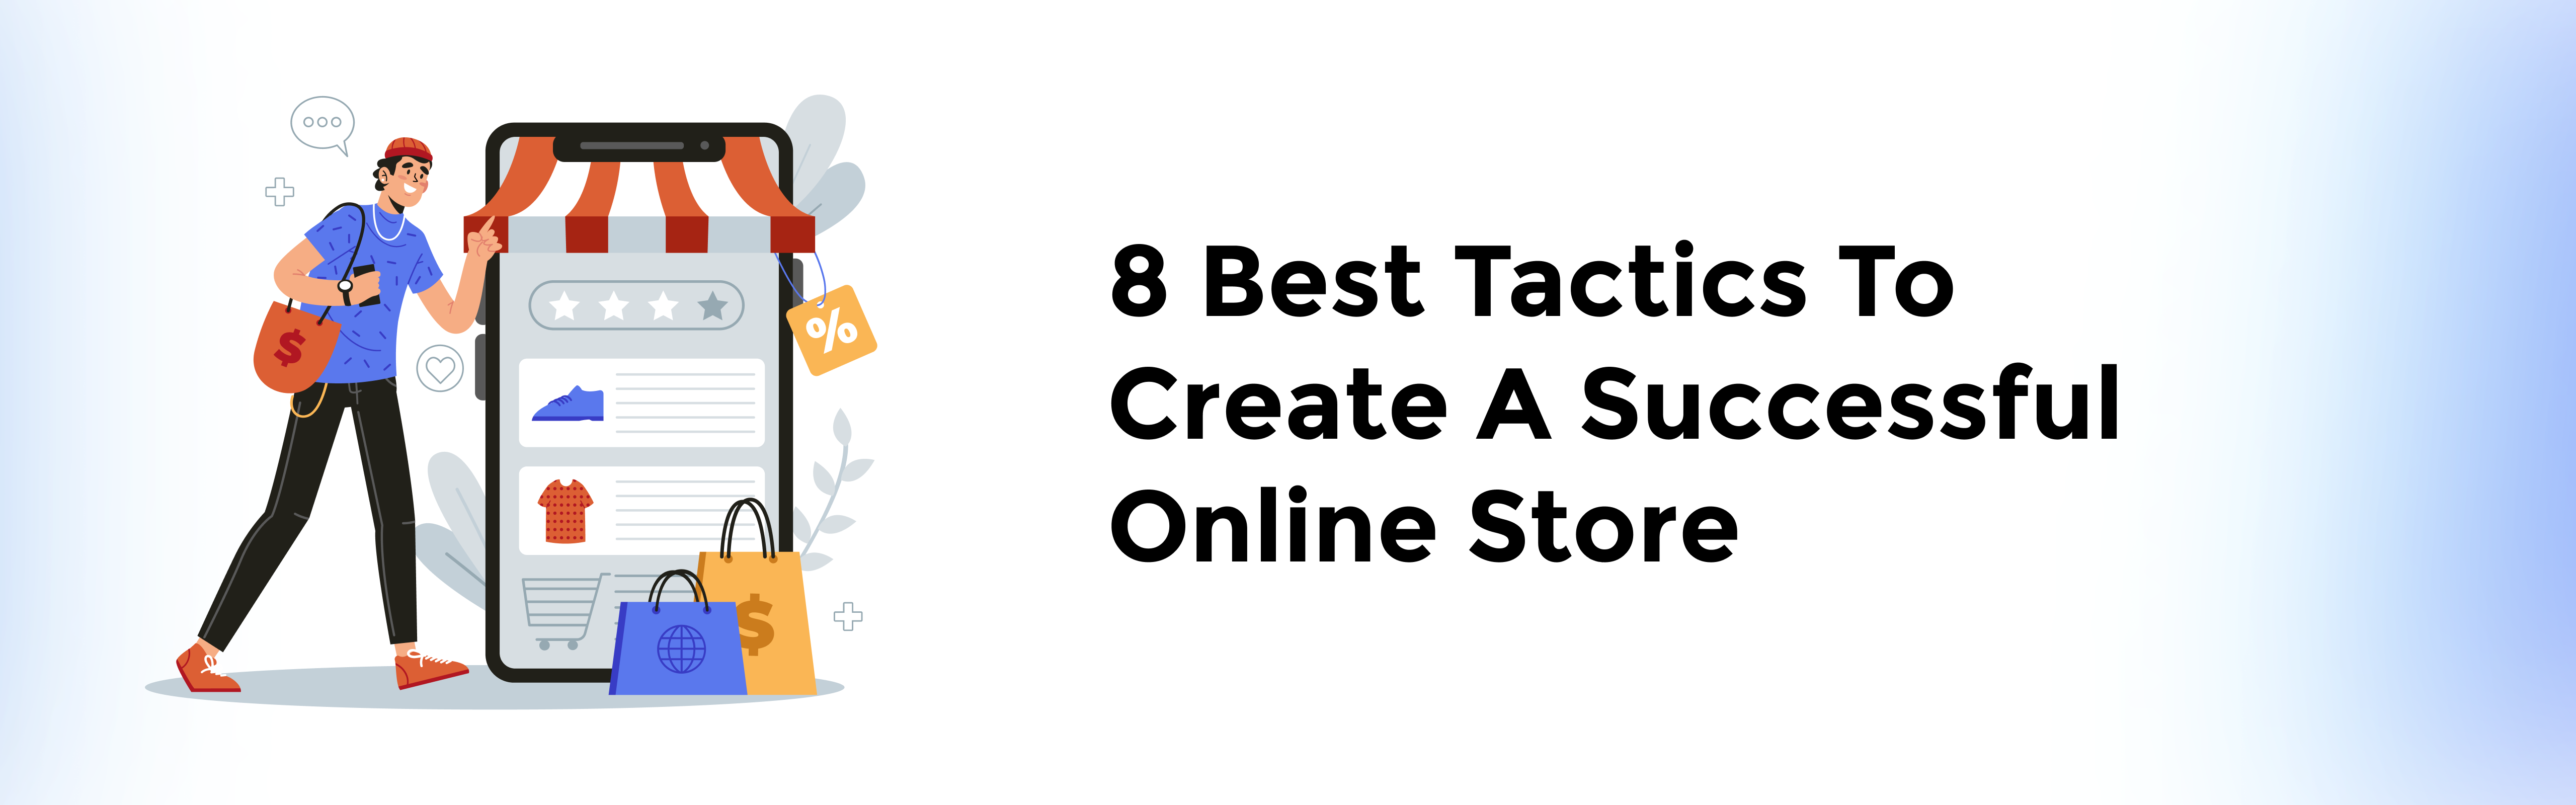 best-tactics-to-create-a successful-online-store